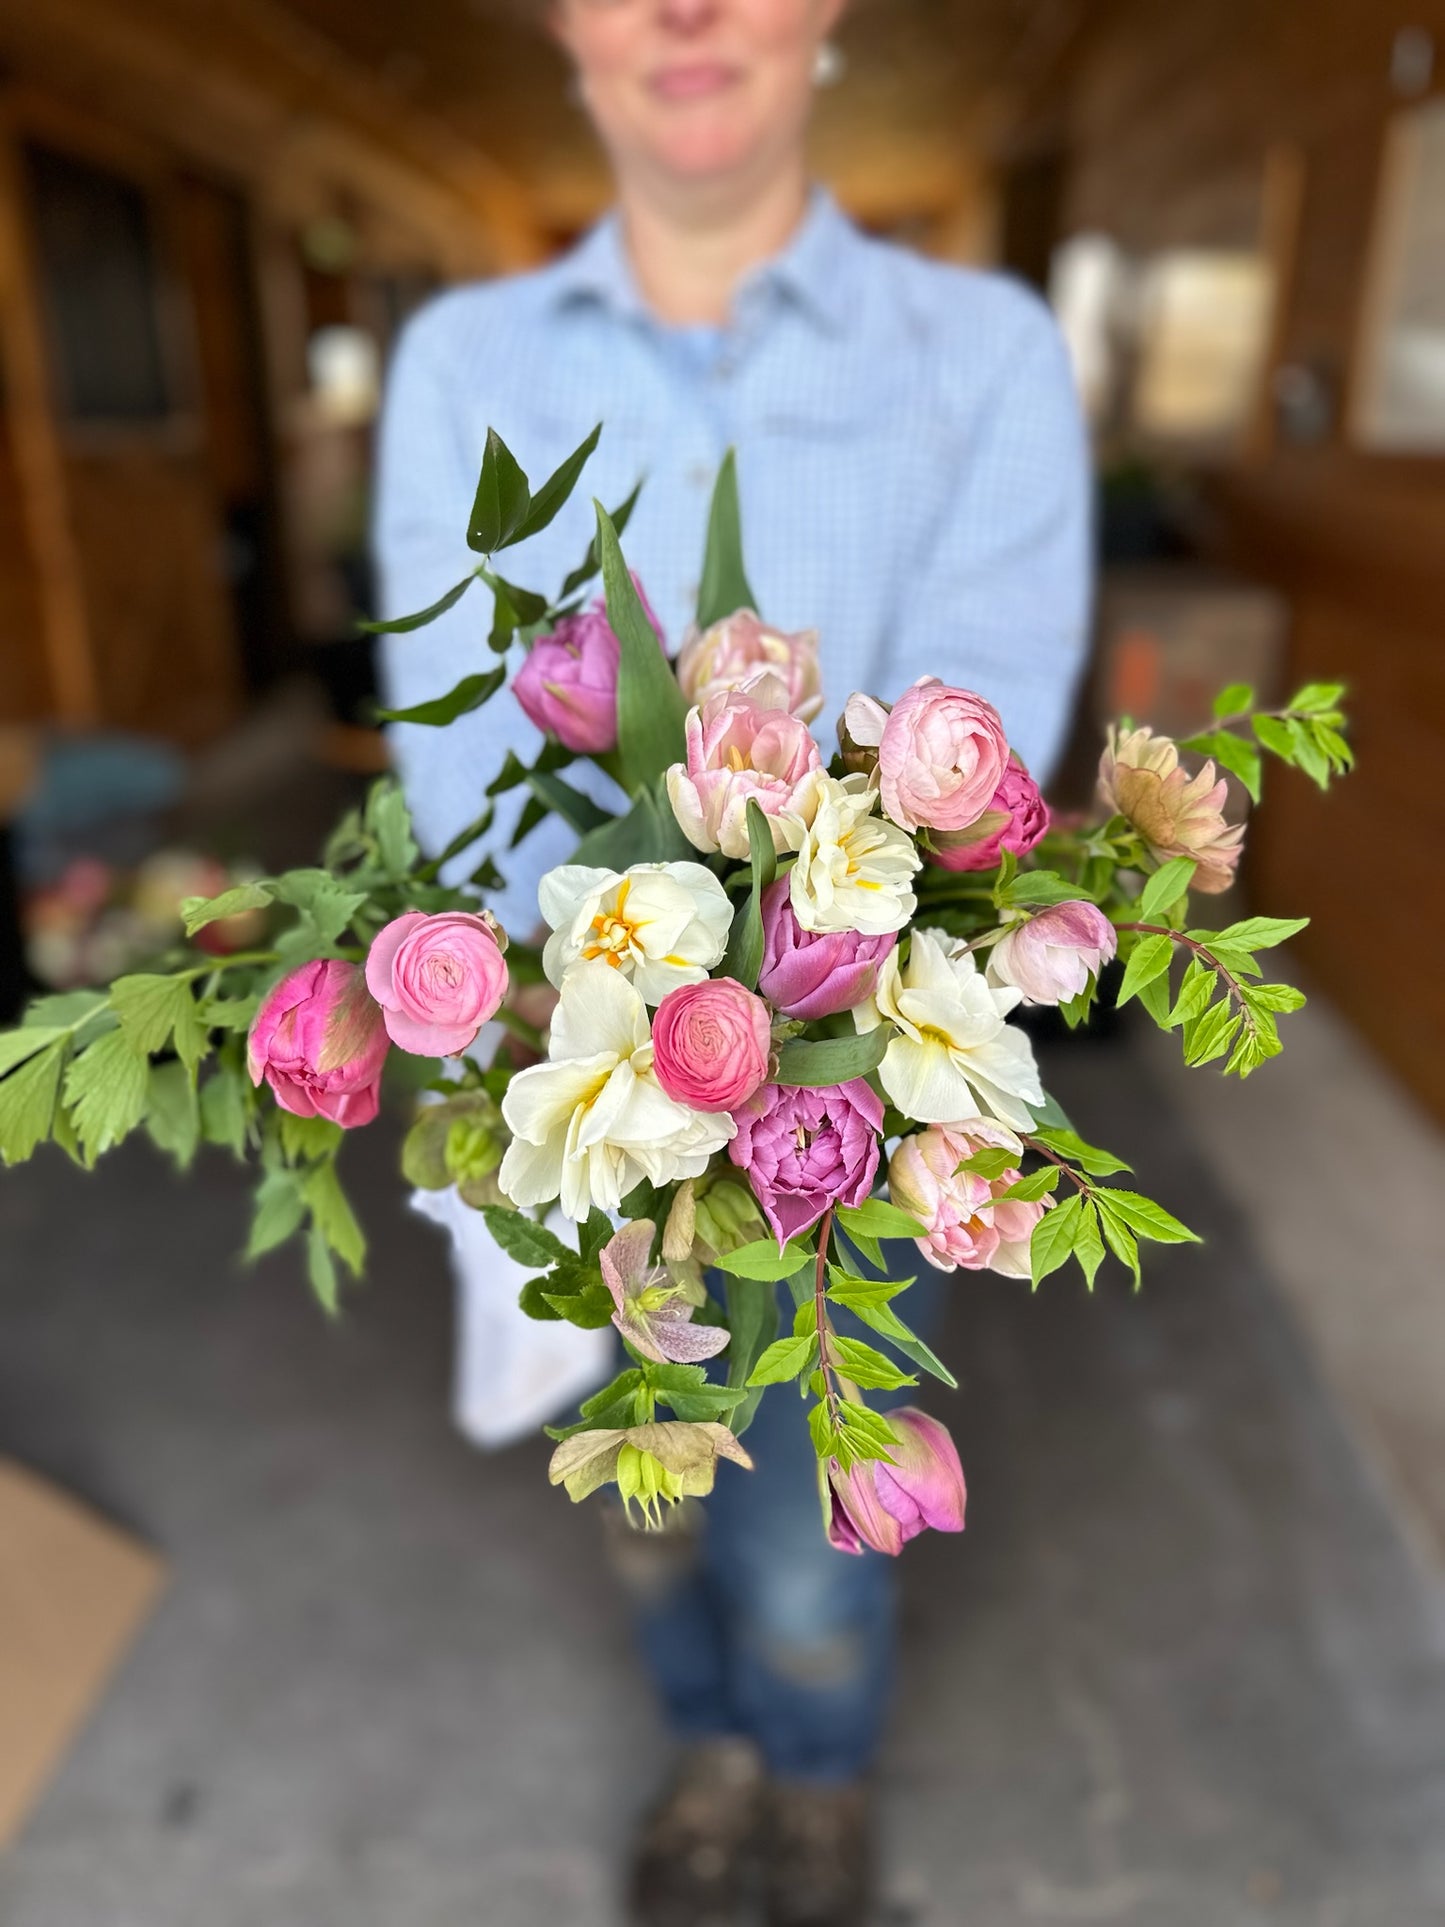 The Weekly Seasonal Bouquet Subscription